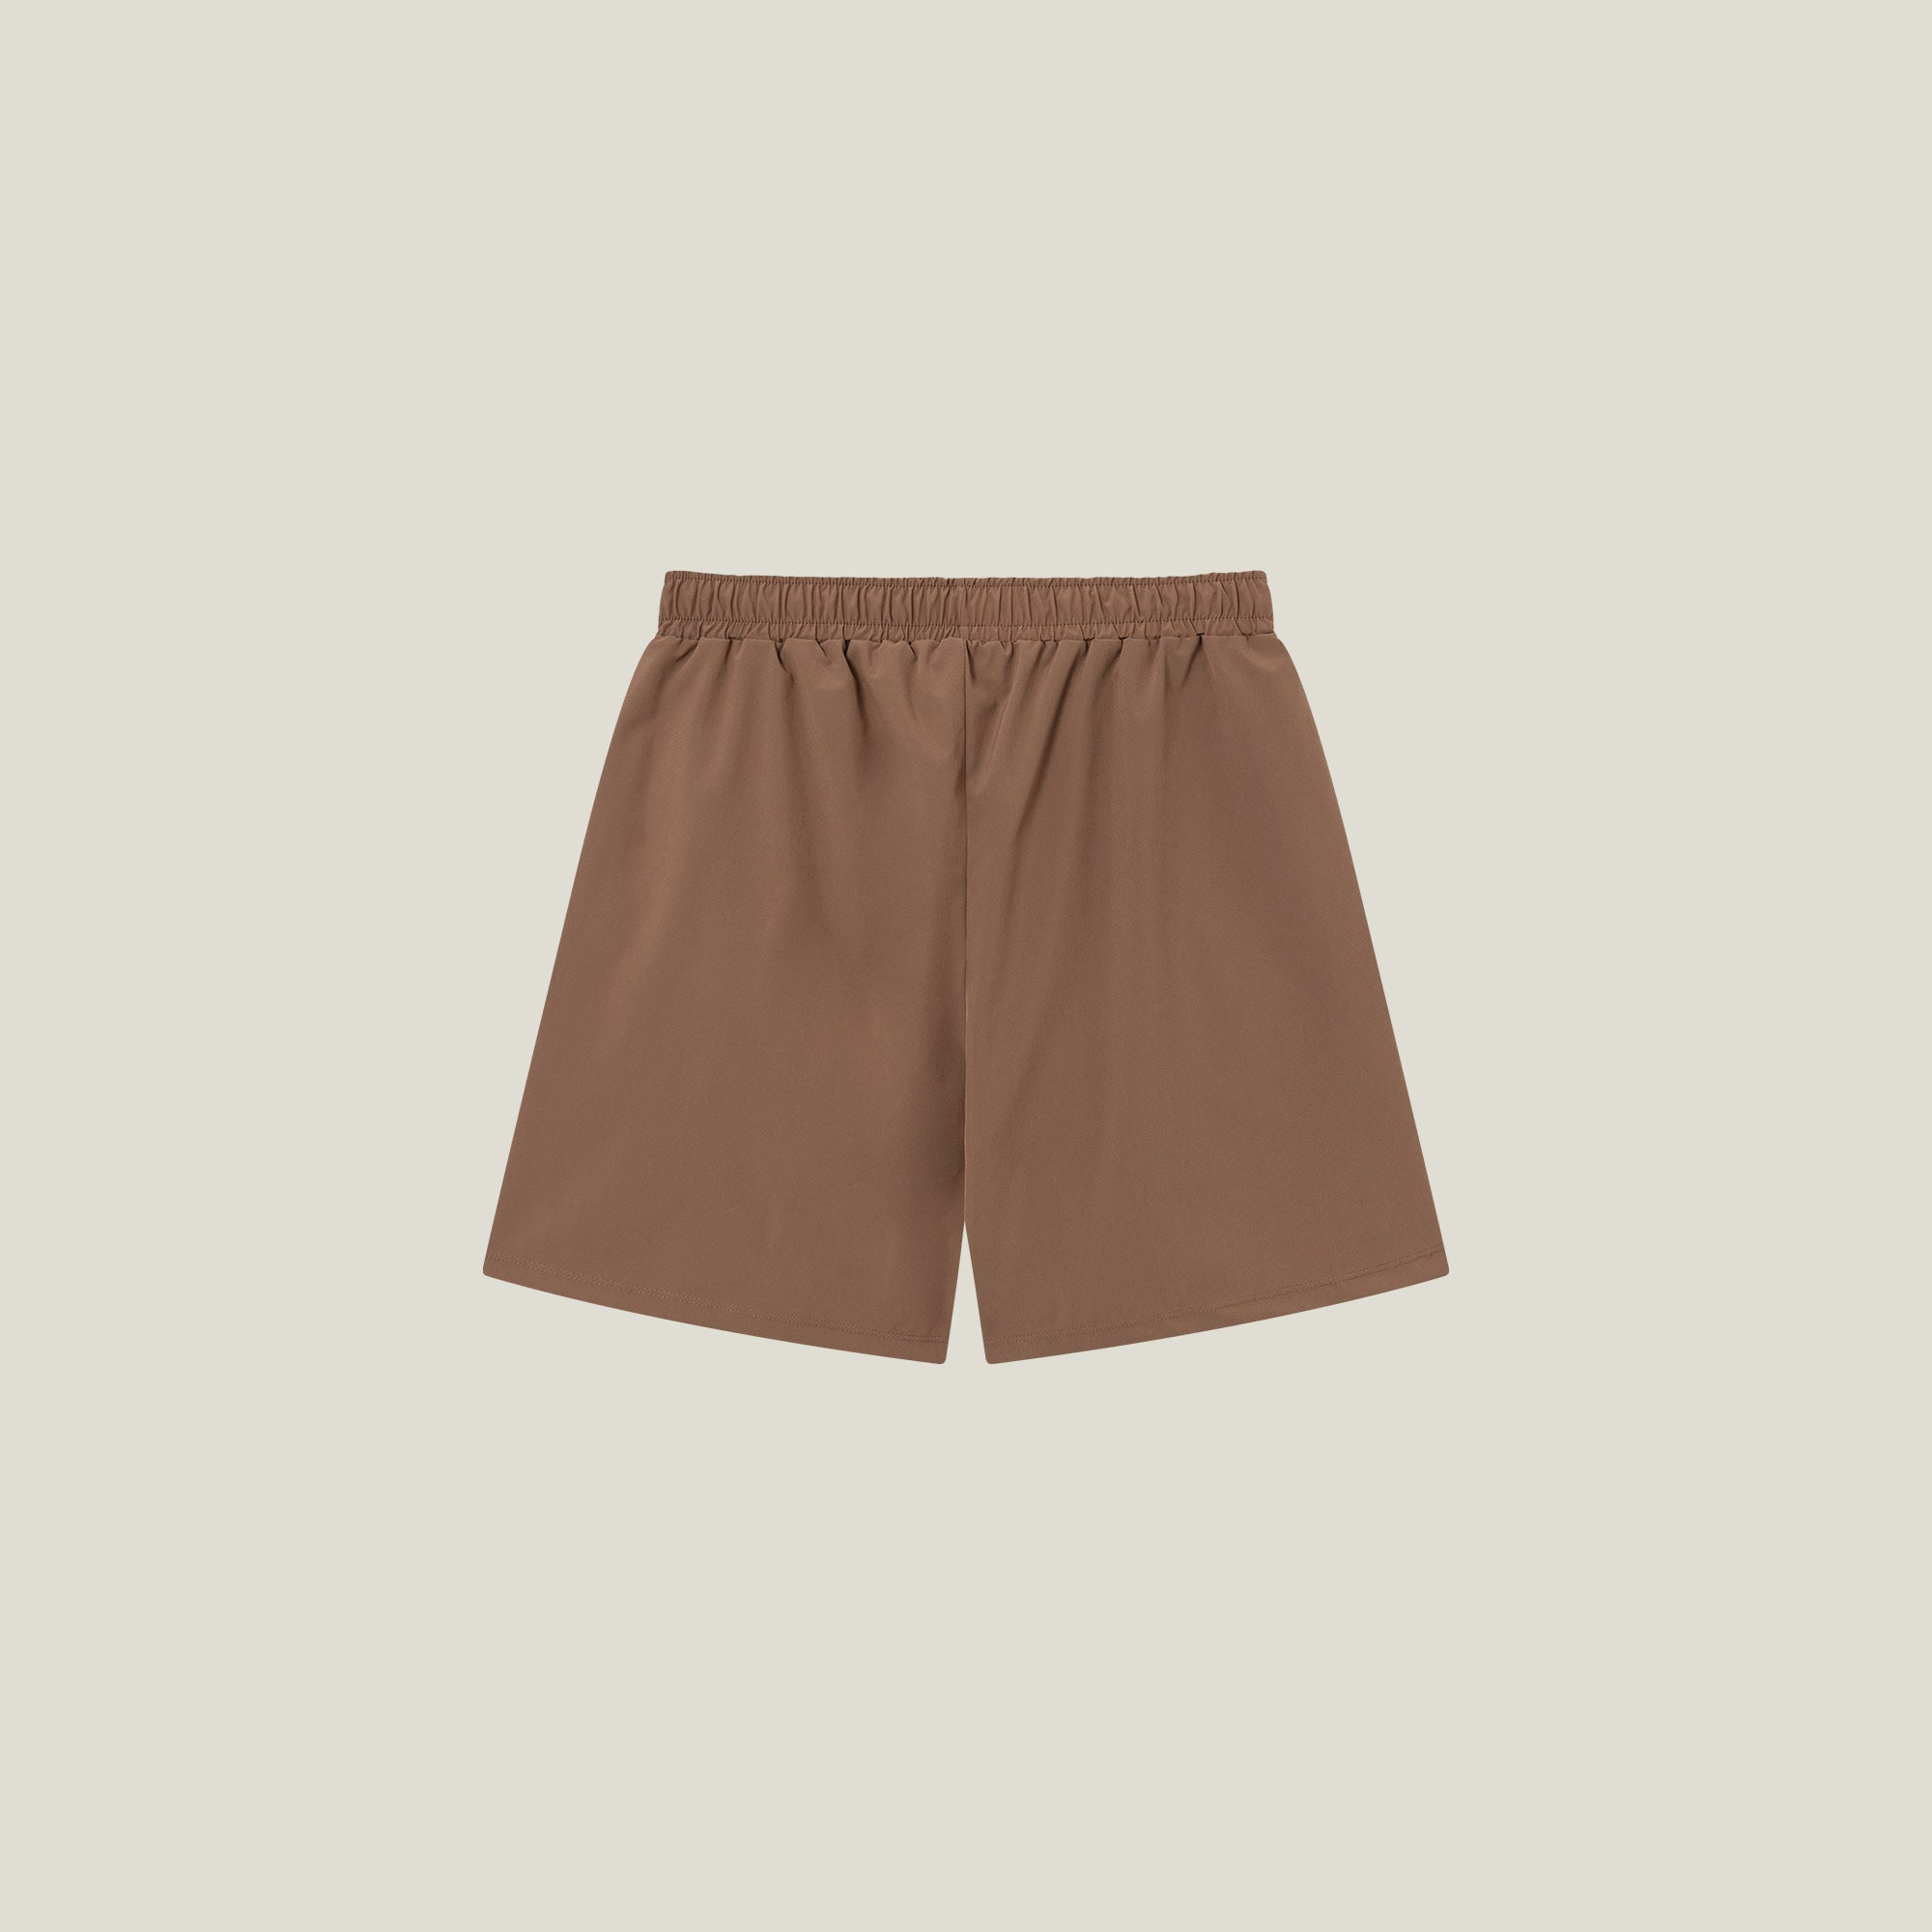 Oncourt Shorts & Long sleeve WPC - Brown & Grey Combo